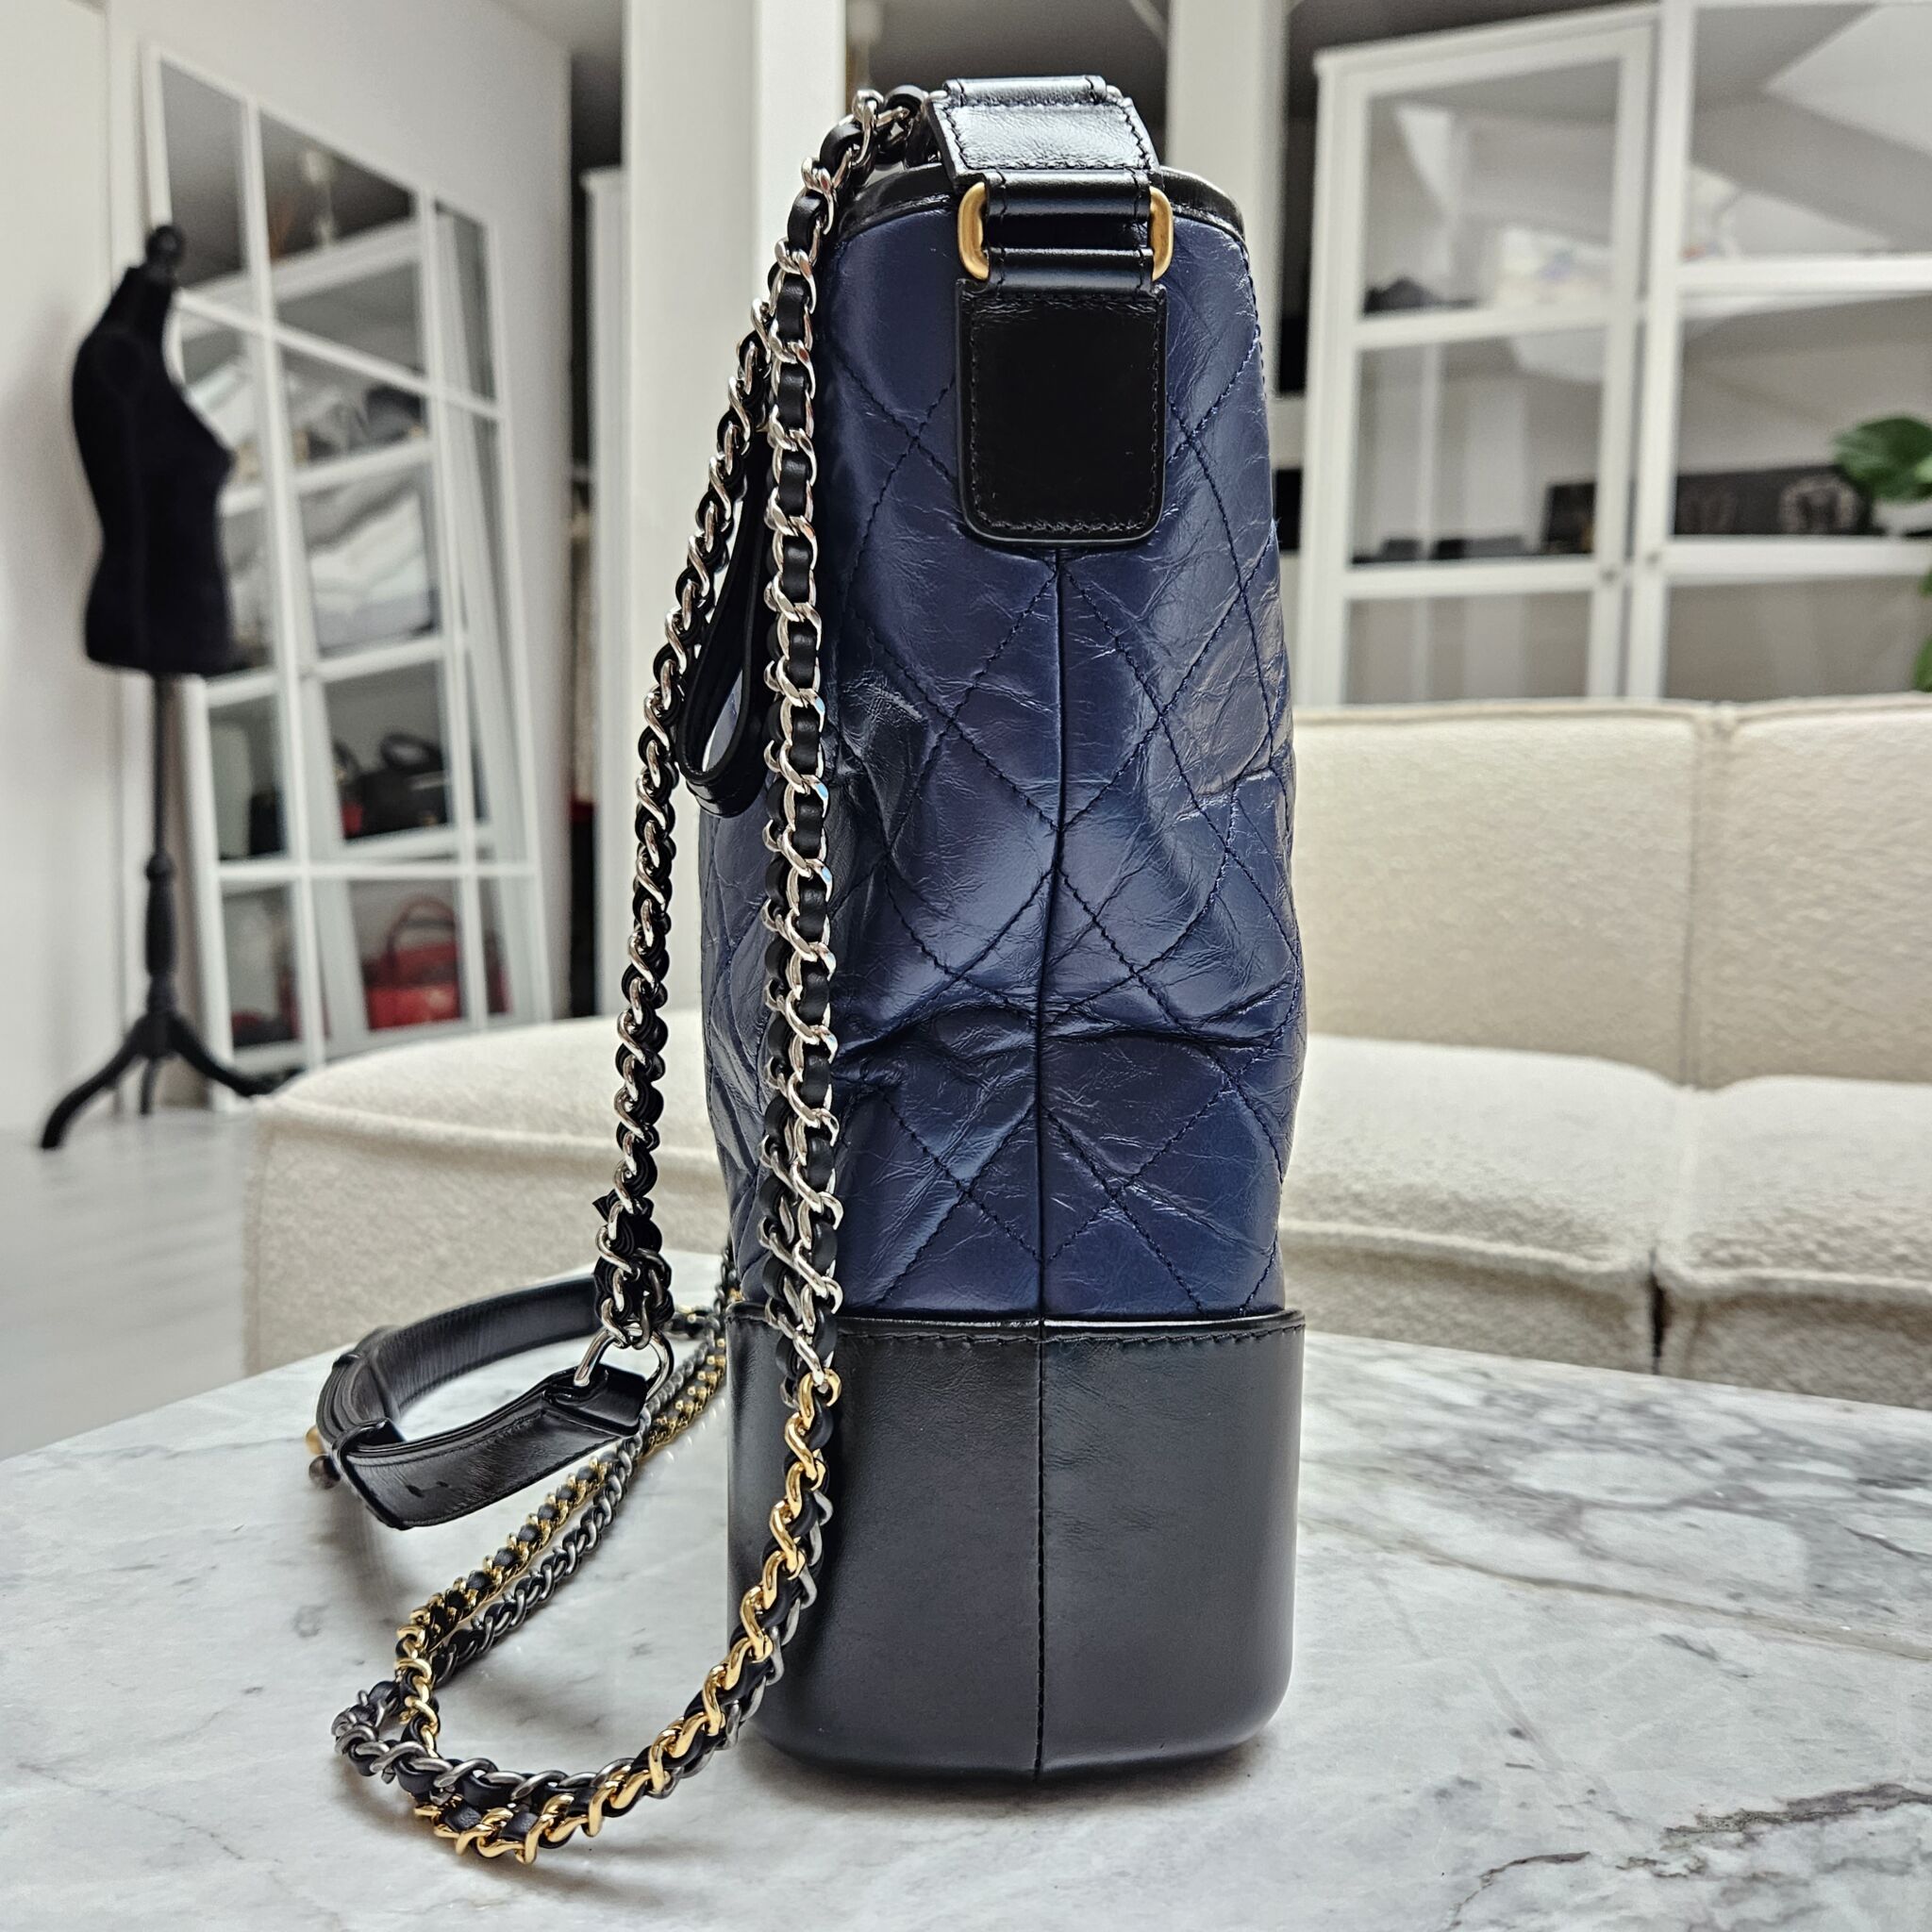 Chanel Large Gabrielle Hobo